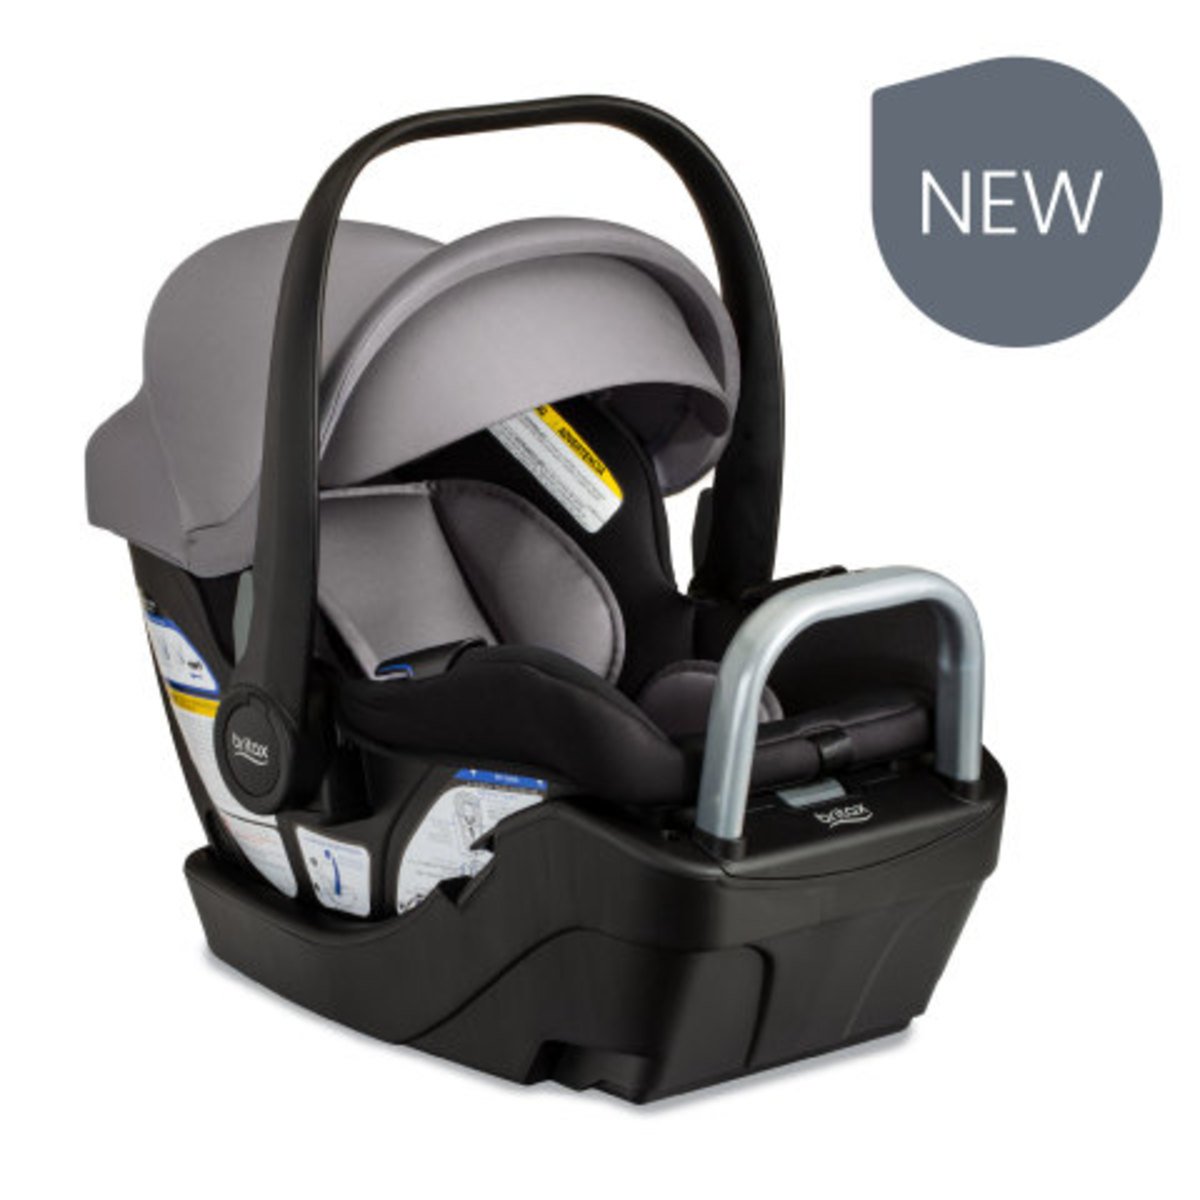 NEW Graphite Onyx Willow S Infant Car Seat